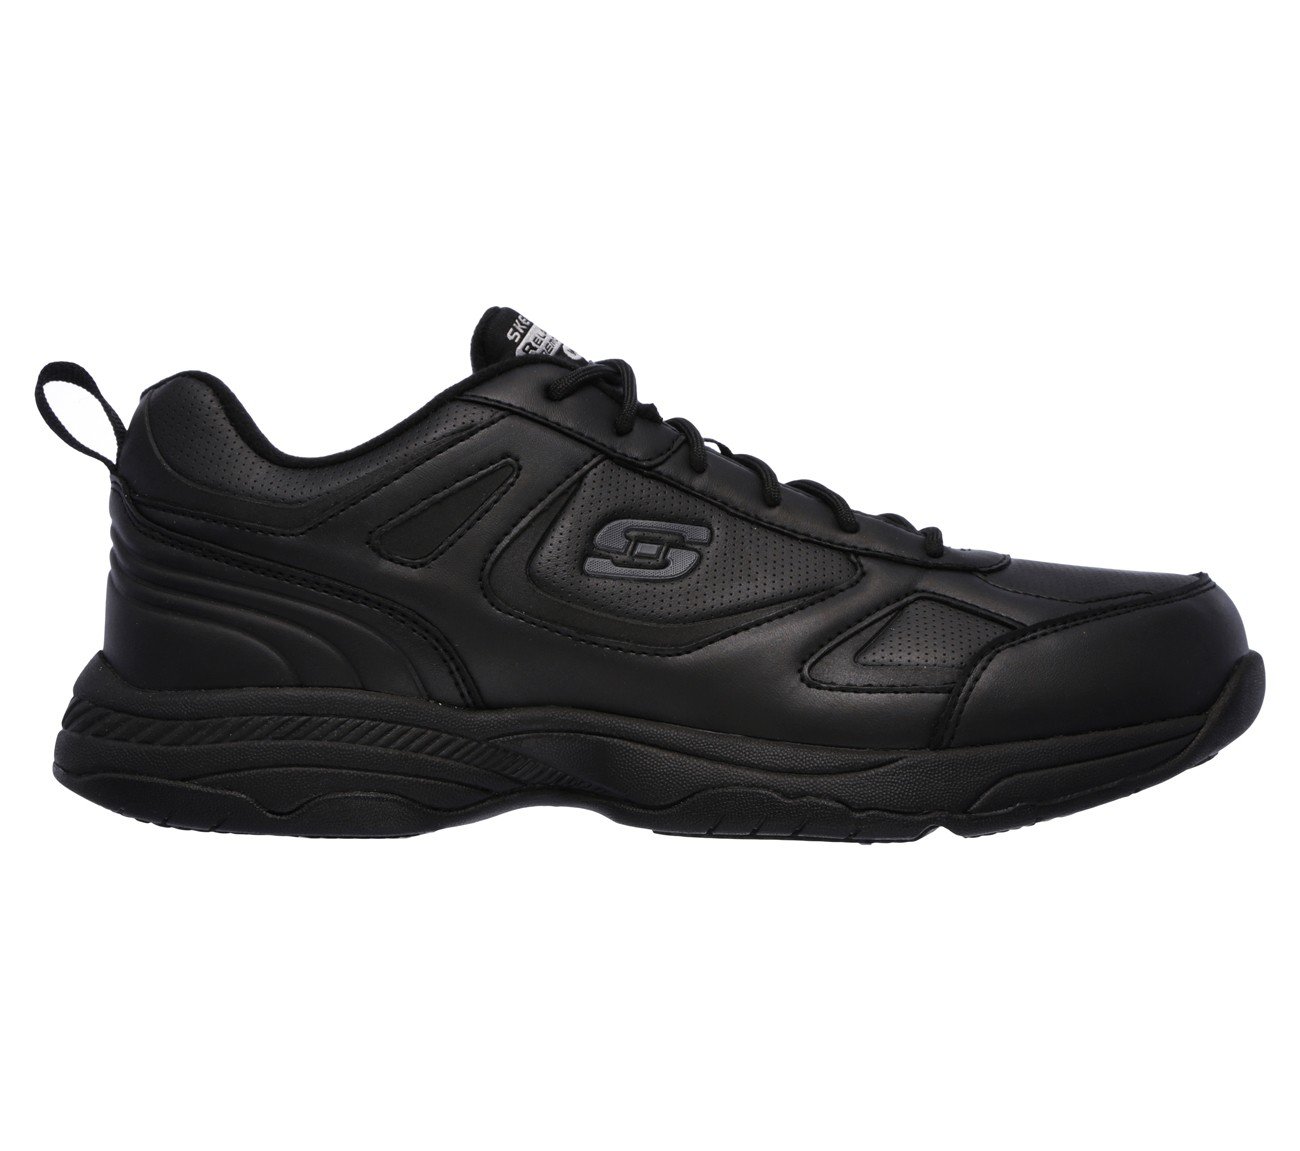 skechers gore tex shoes off 71 